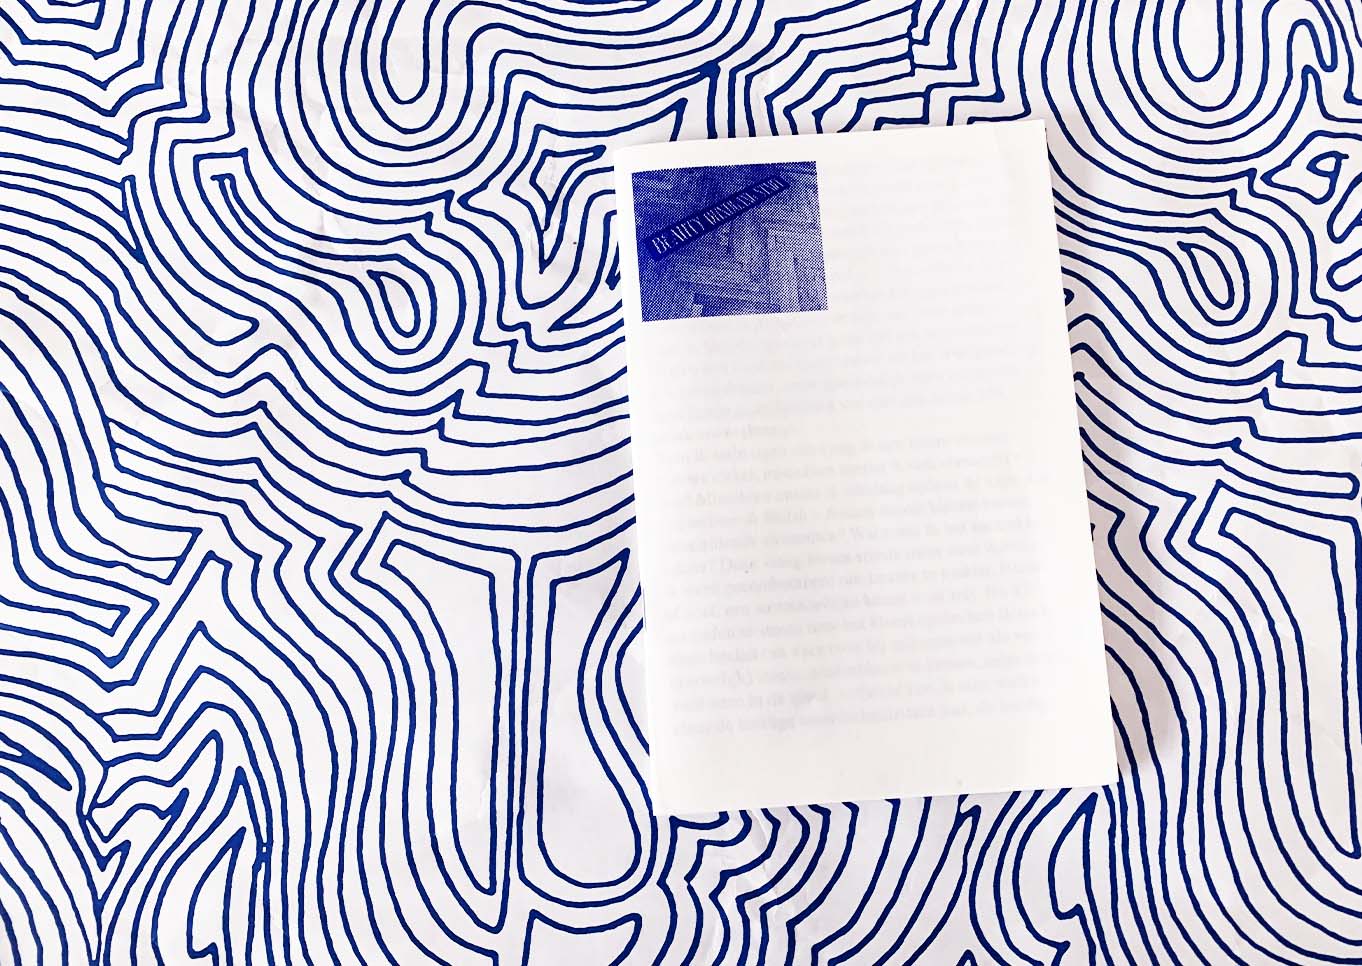 About Beauty, risograph, Manon Lambeens